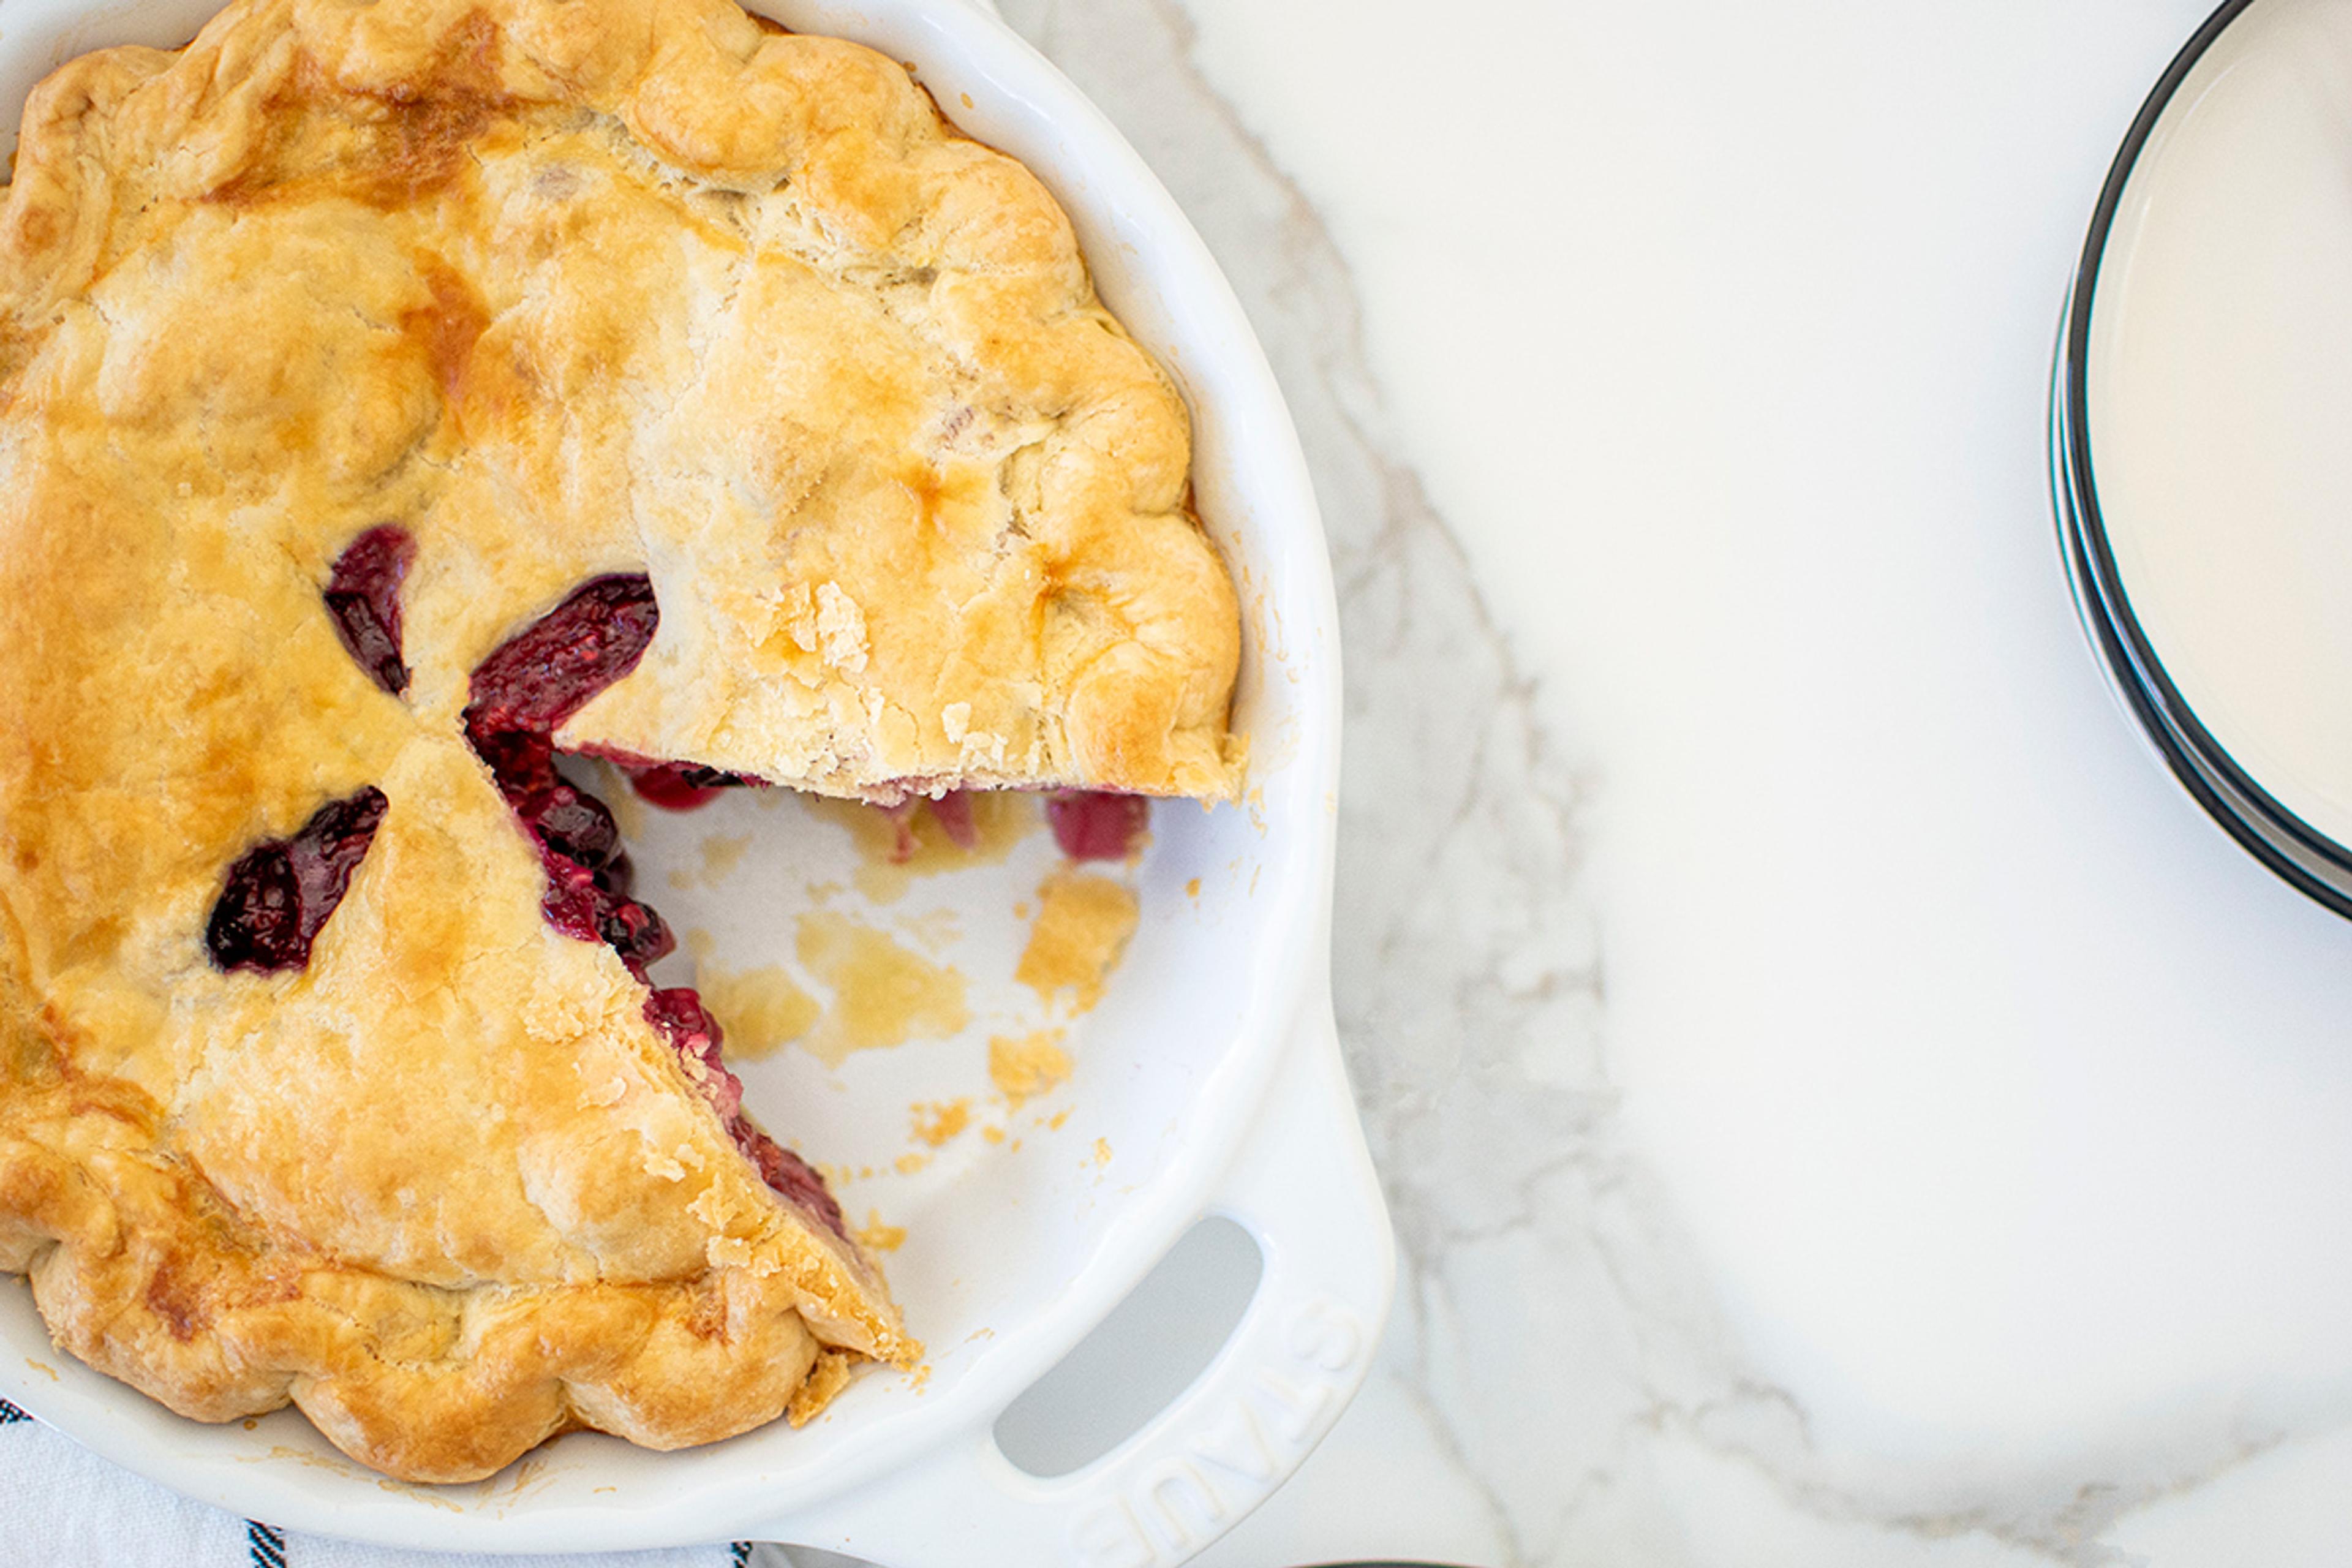 Slice of pie cut out of a mouth-watering triple berry pie with a flaky buttery crust.